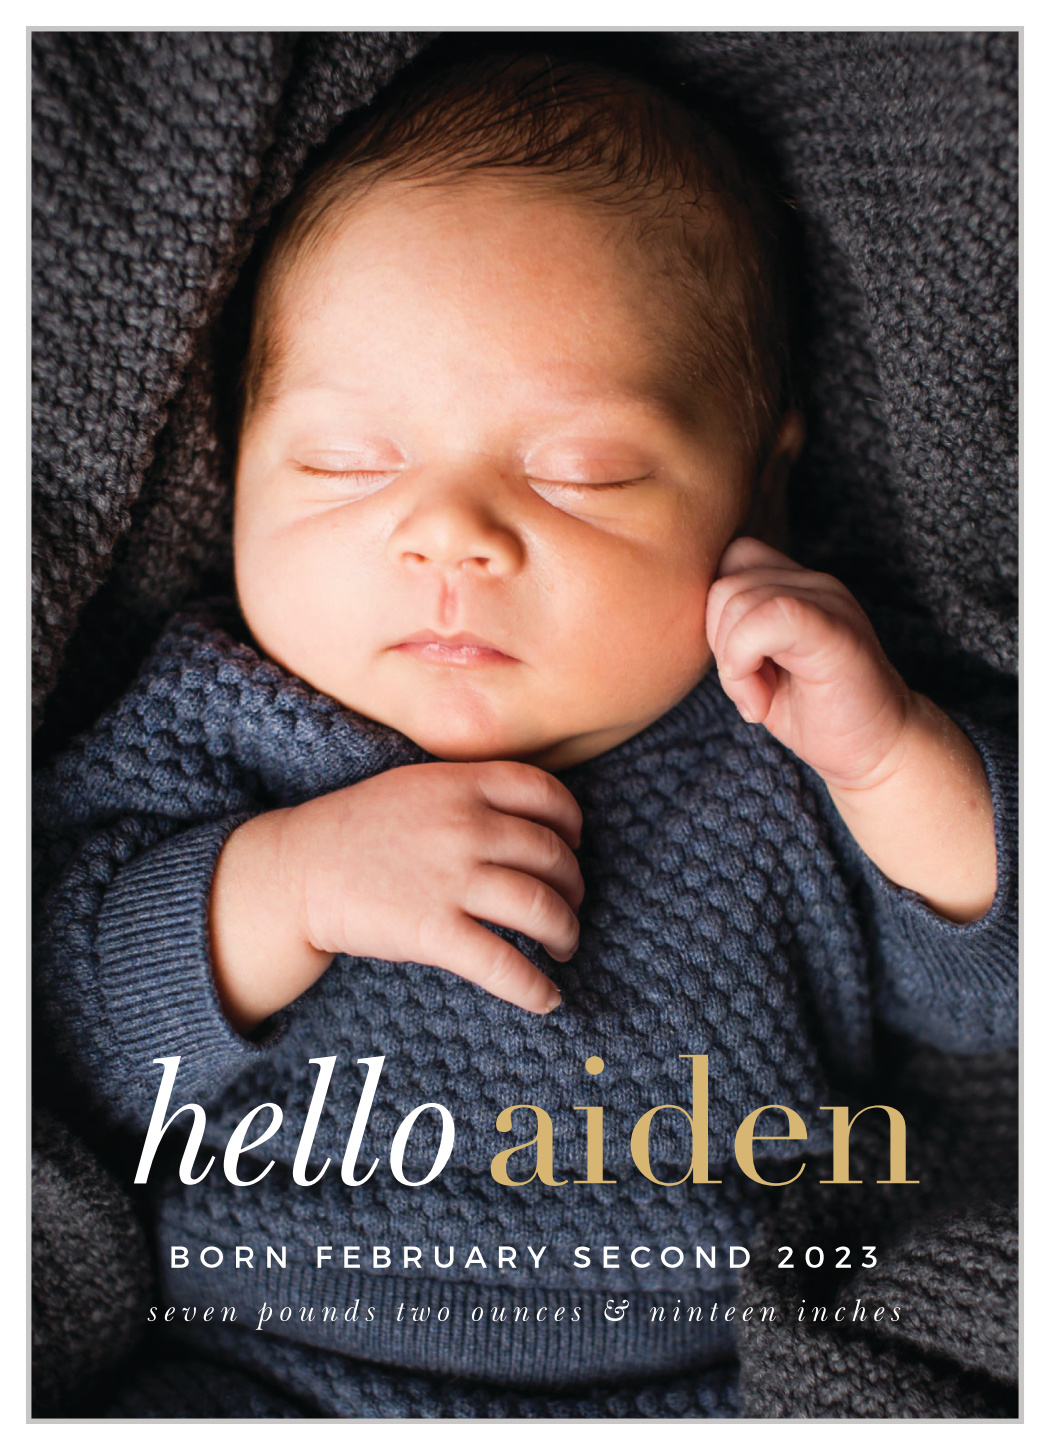 Greeting Baby Birth Announcements